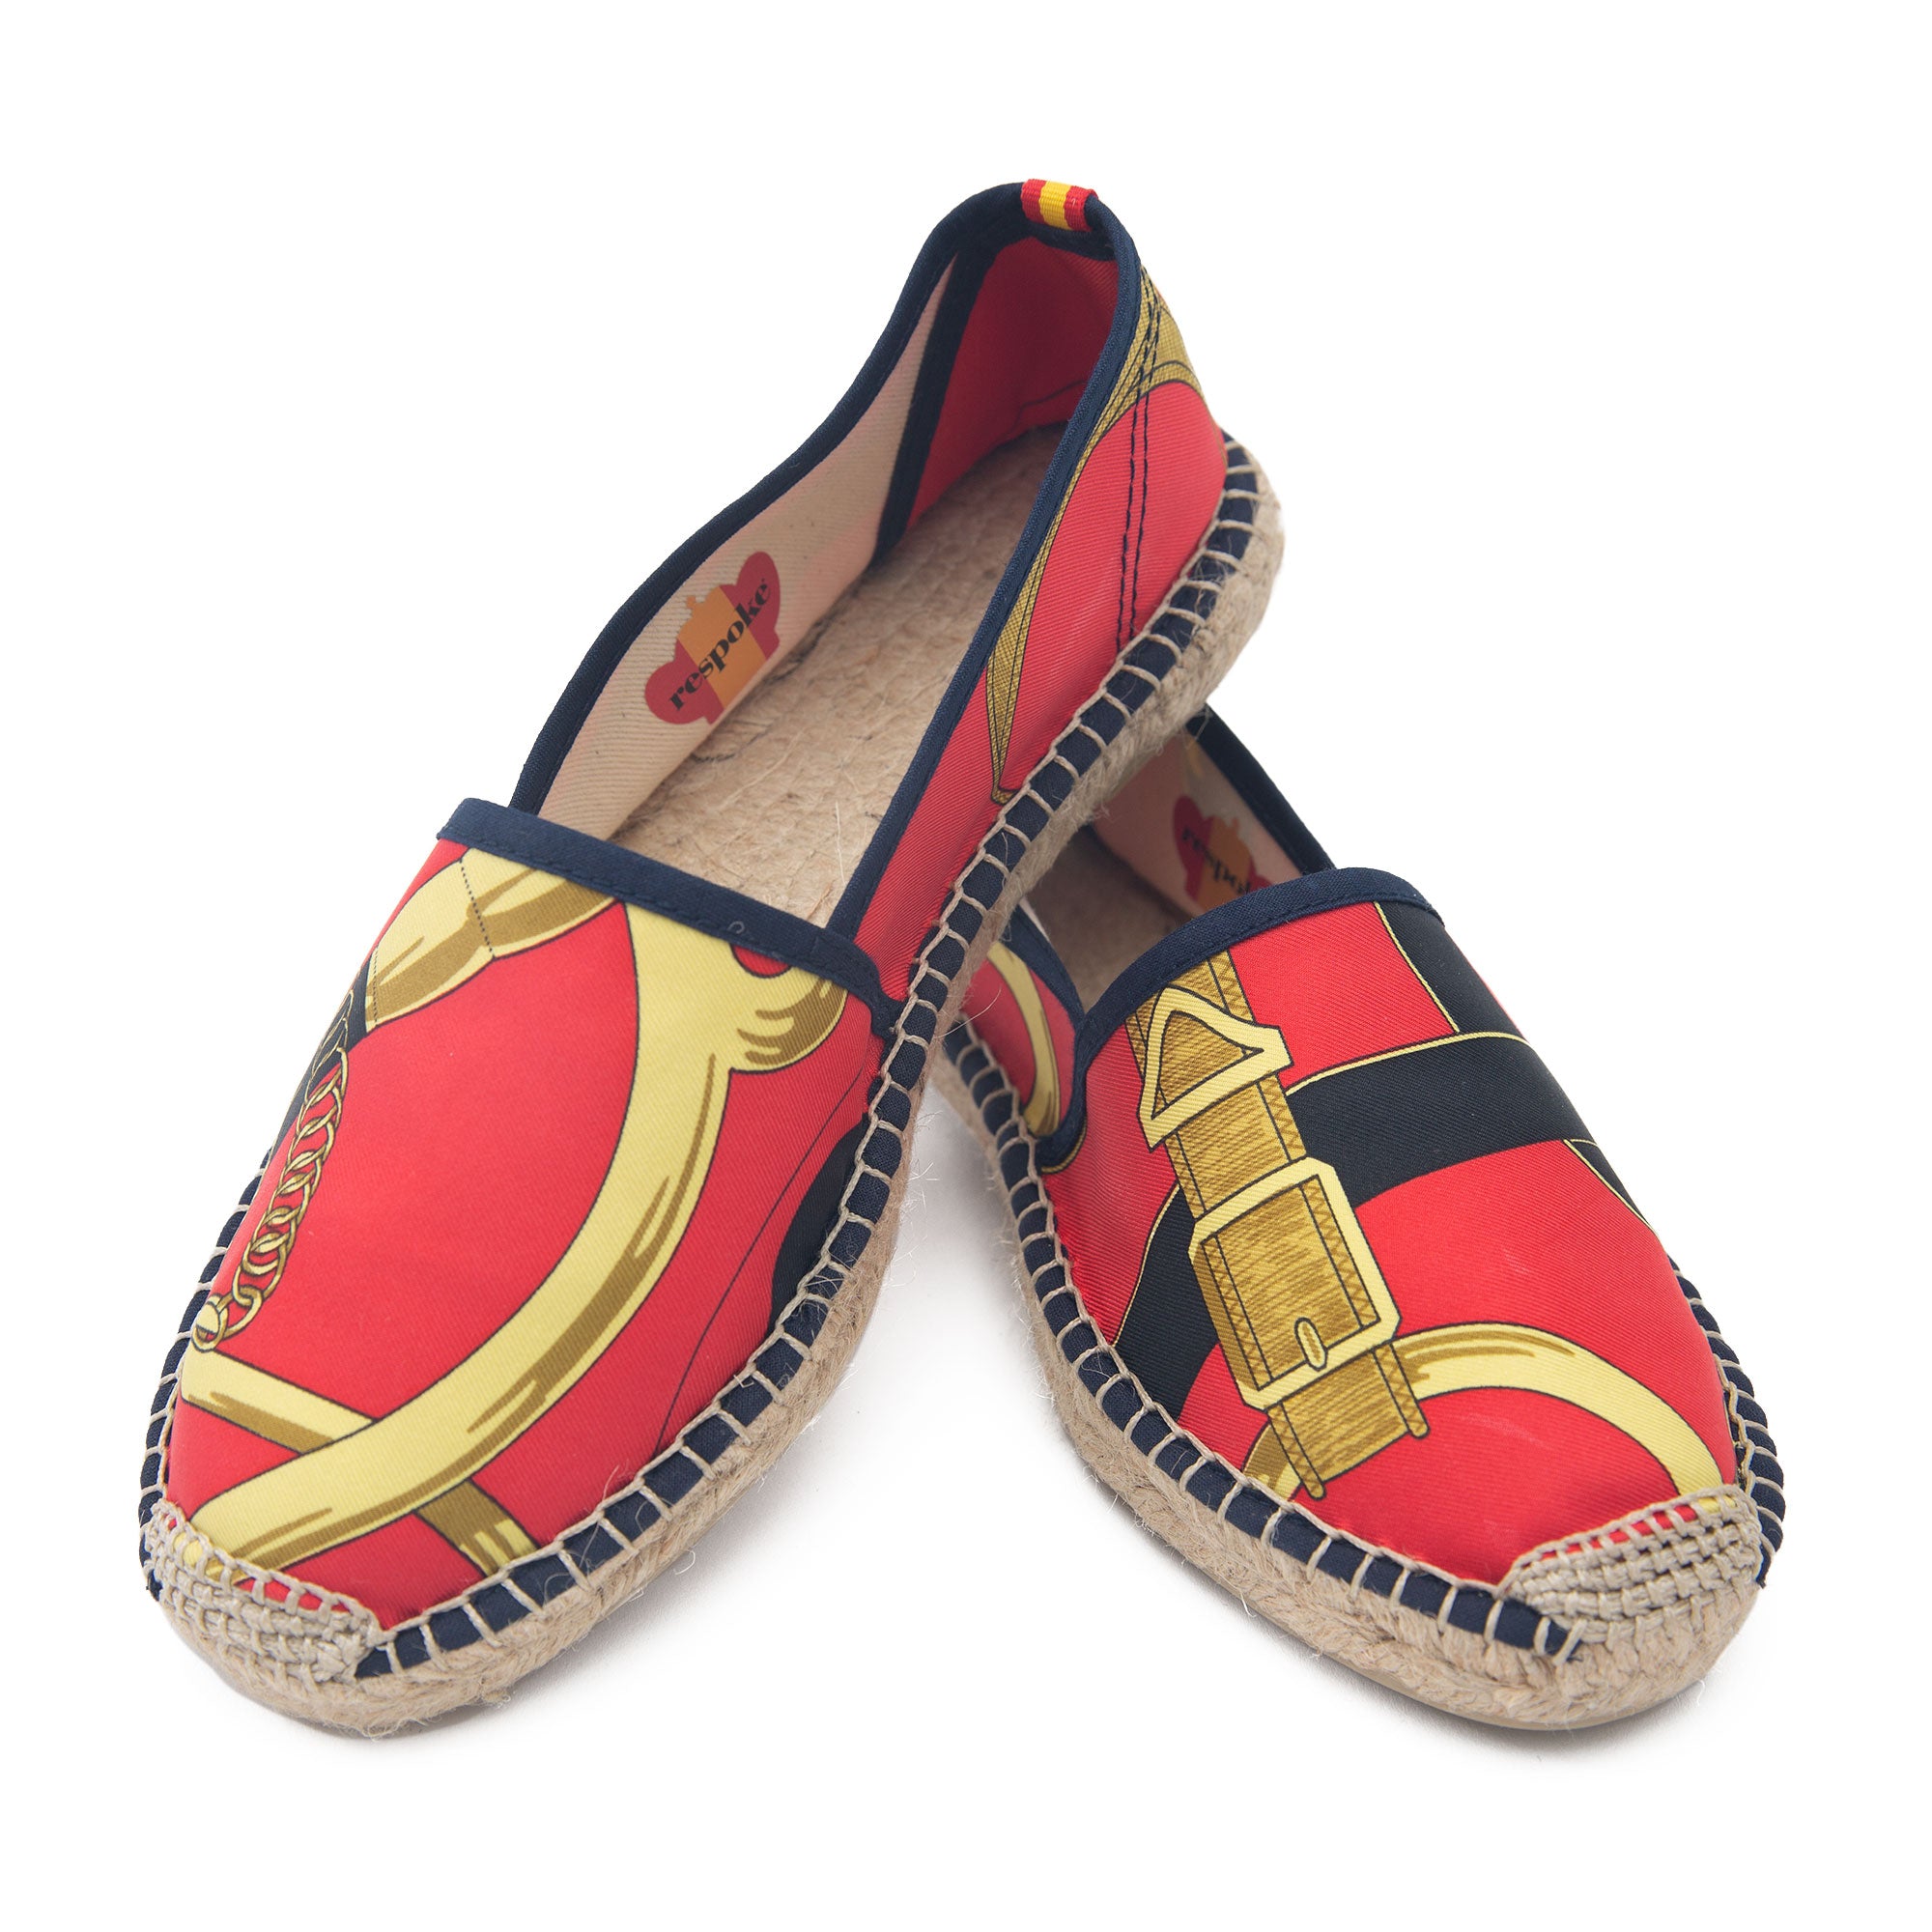 EPERON Red/Black Classic Espadrilles